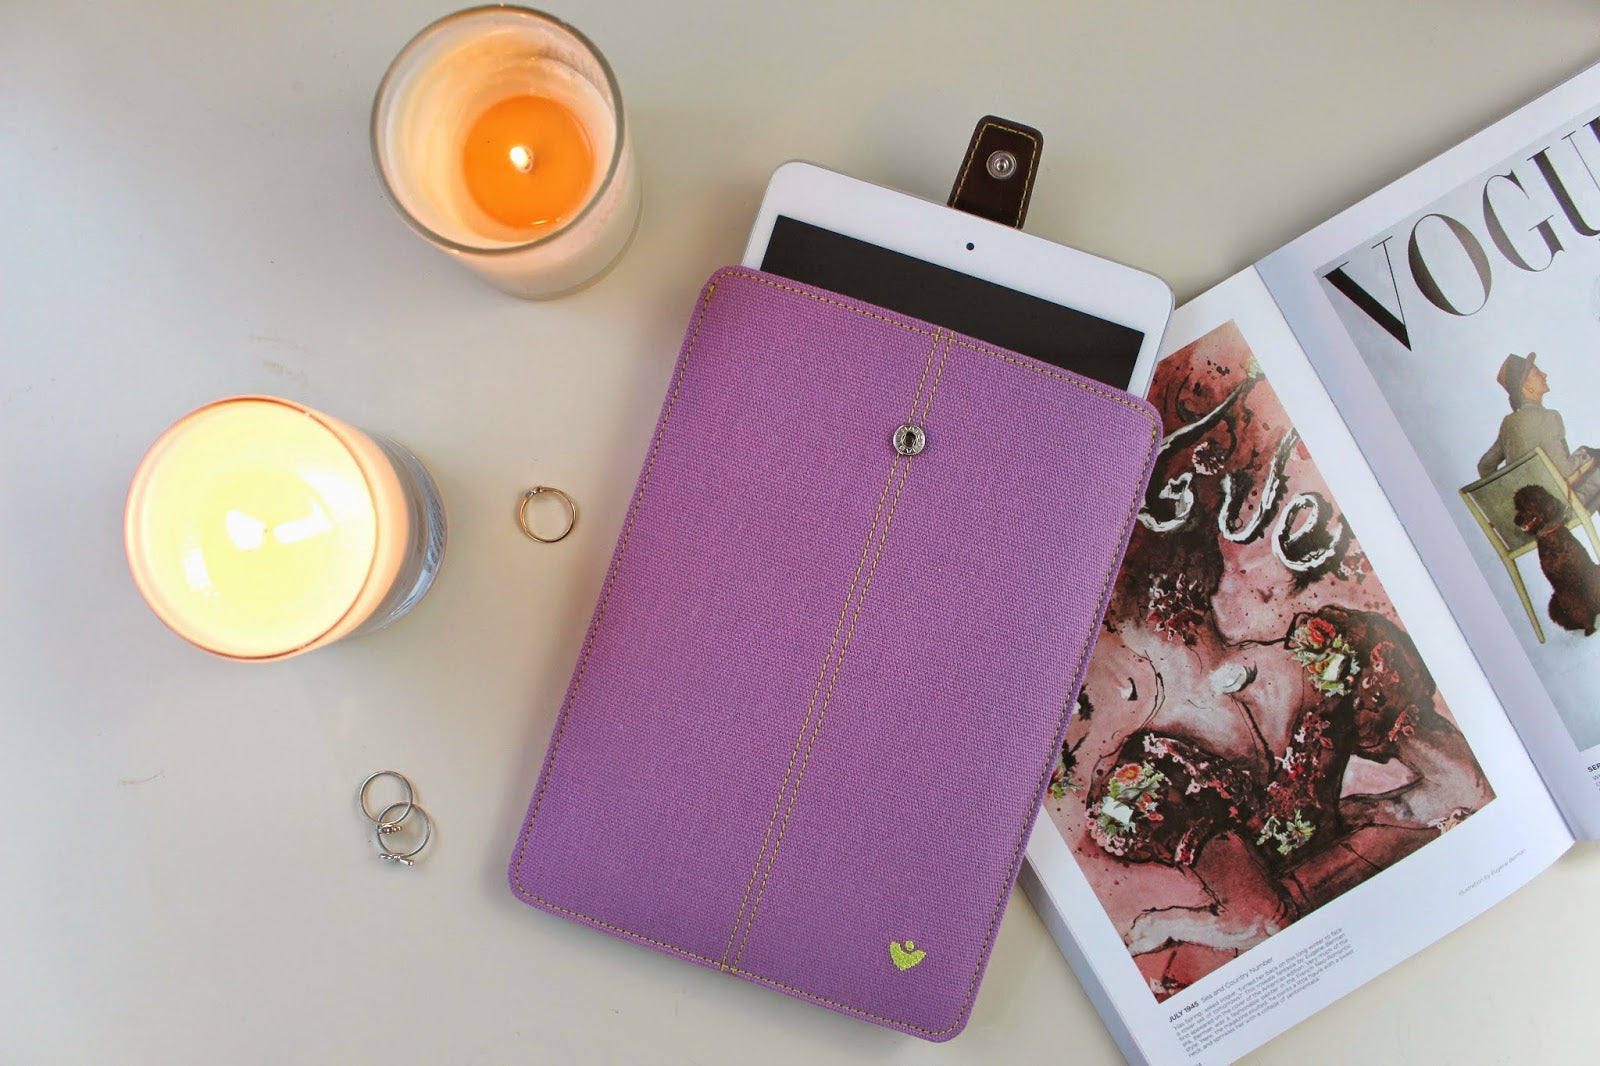 NueVue Purple iPad mini case with safety locking ejection strap